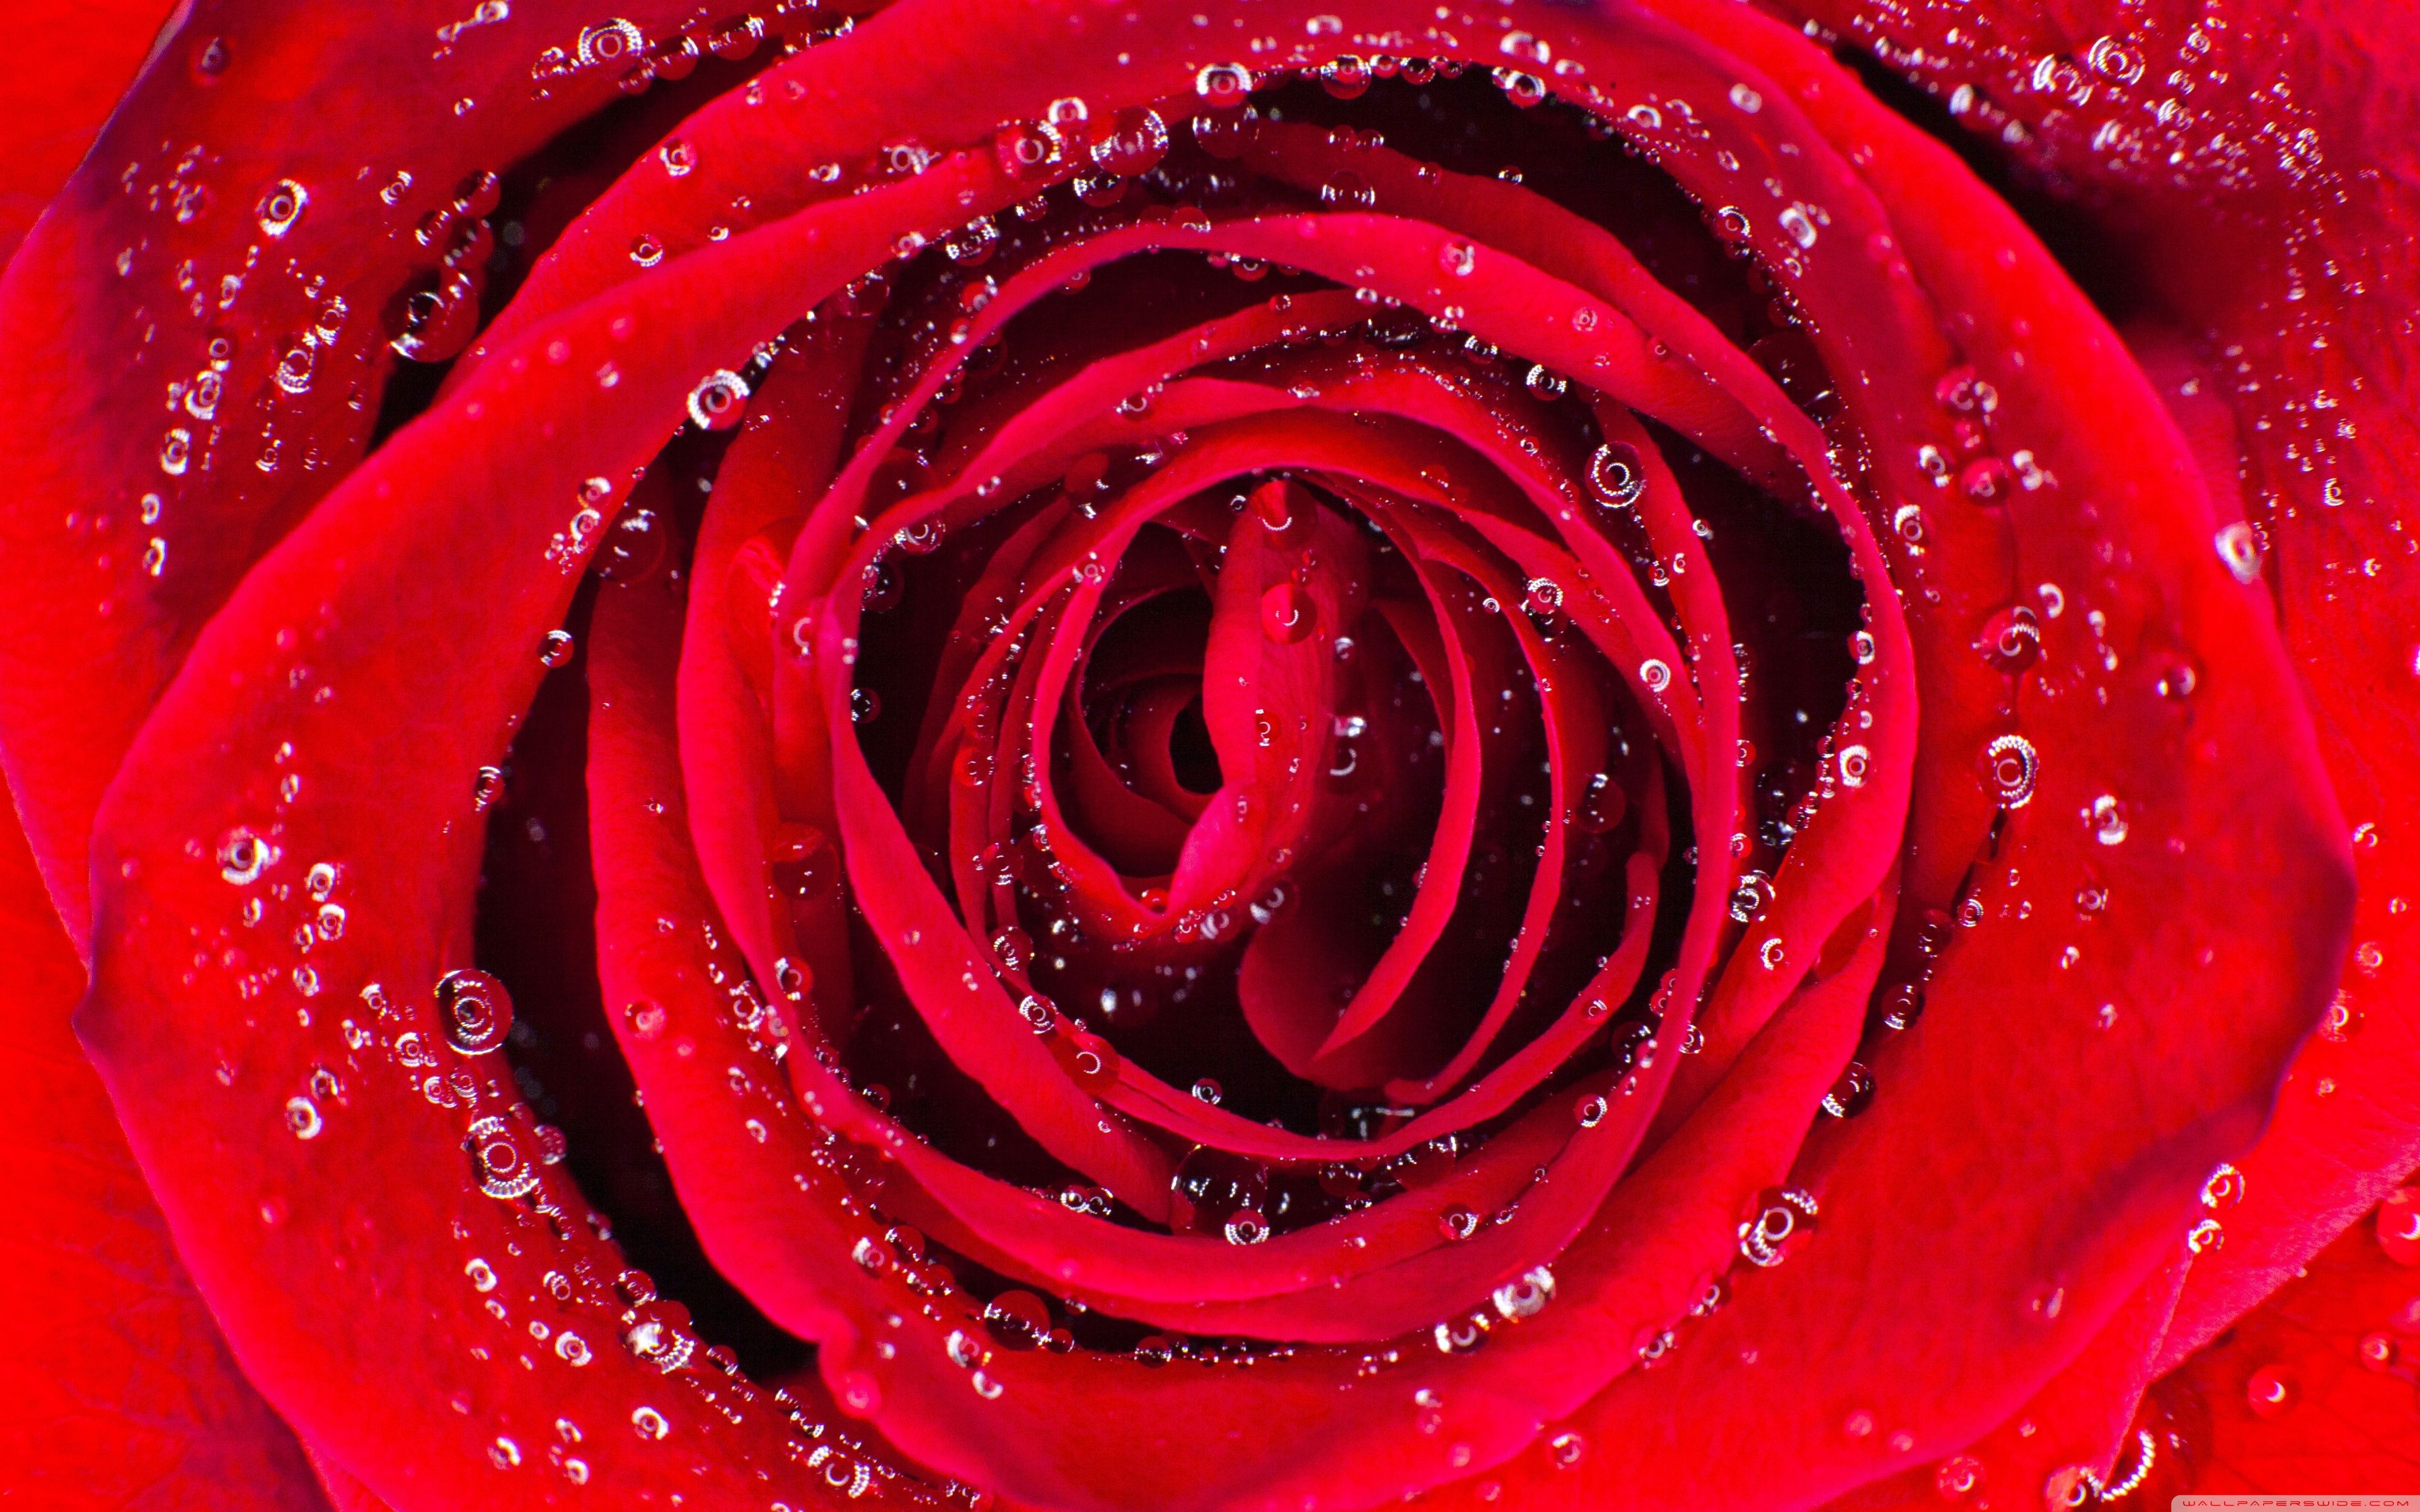 A close up of a red rose with water droplets on it - Roses